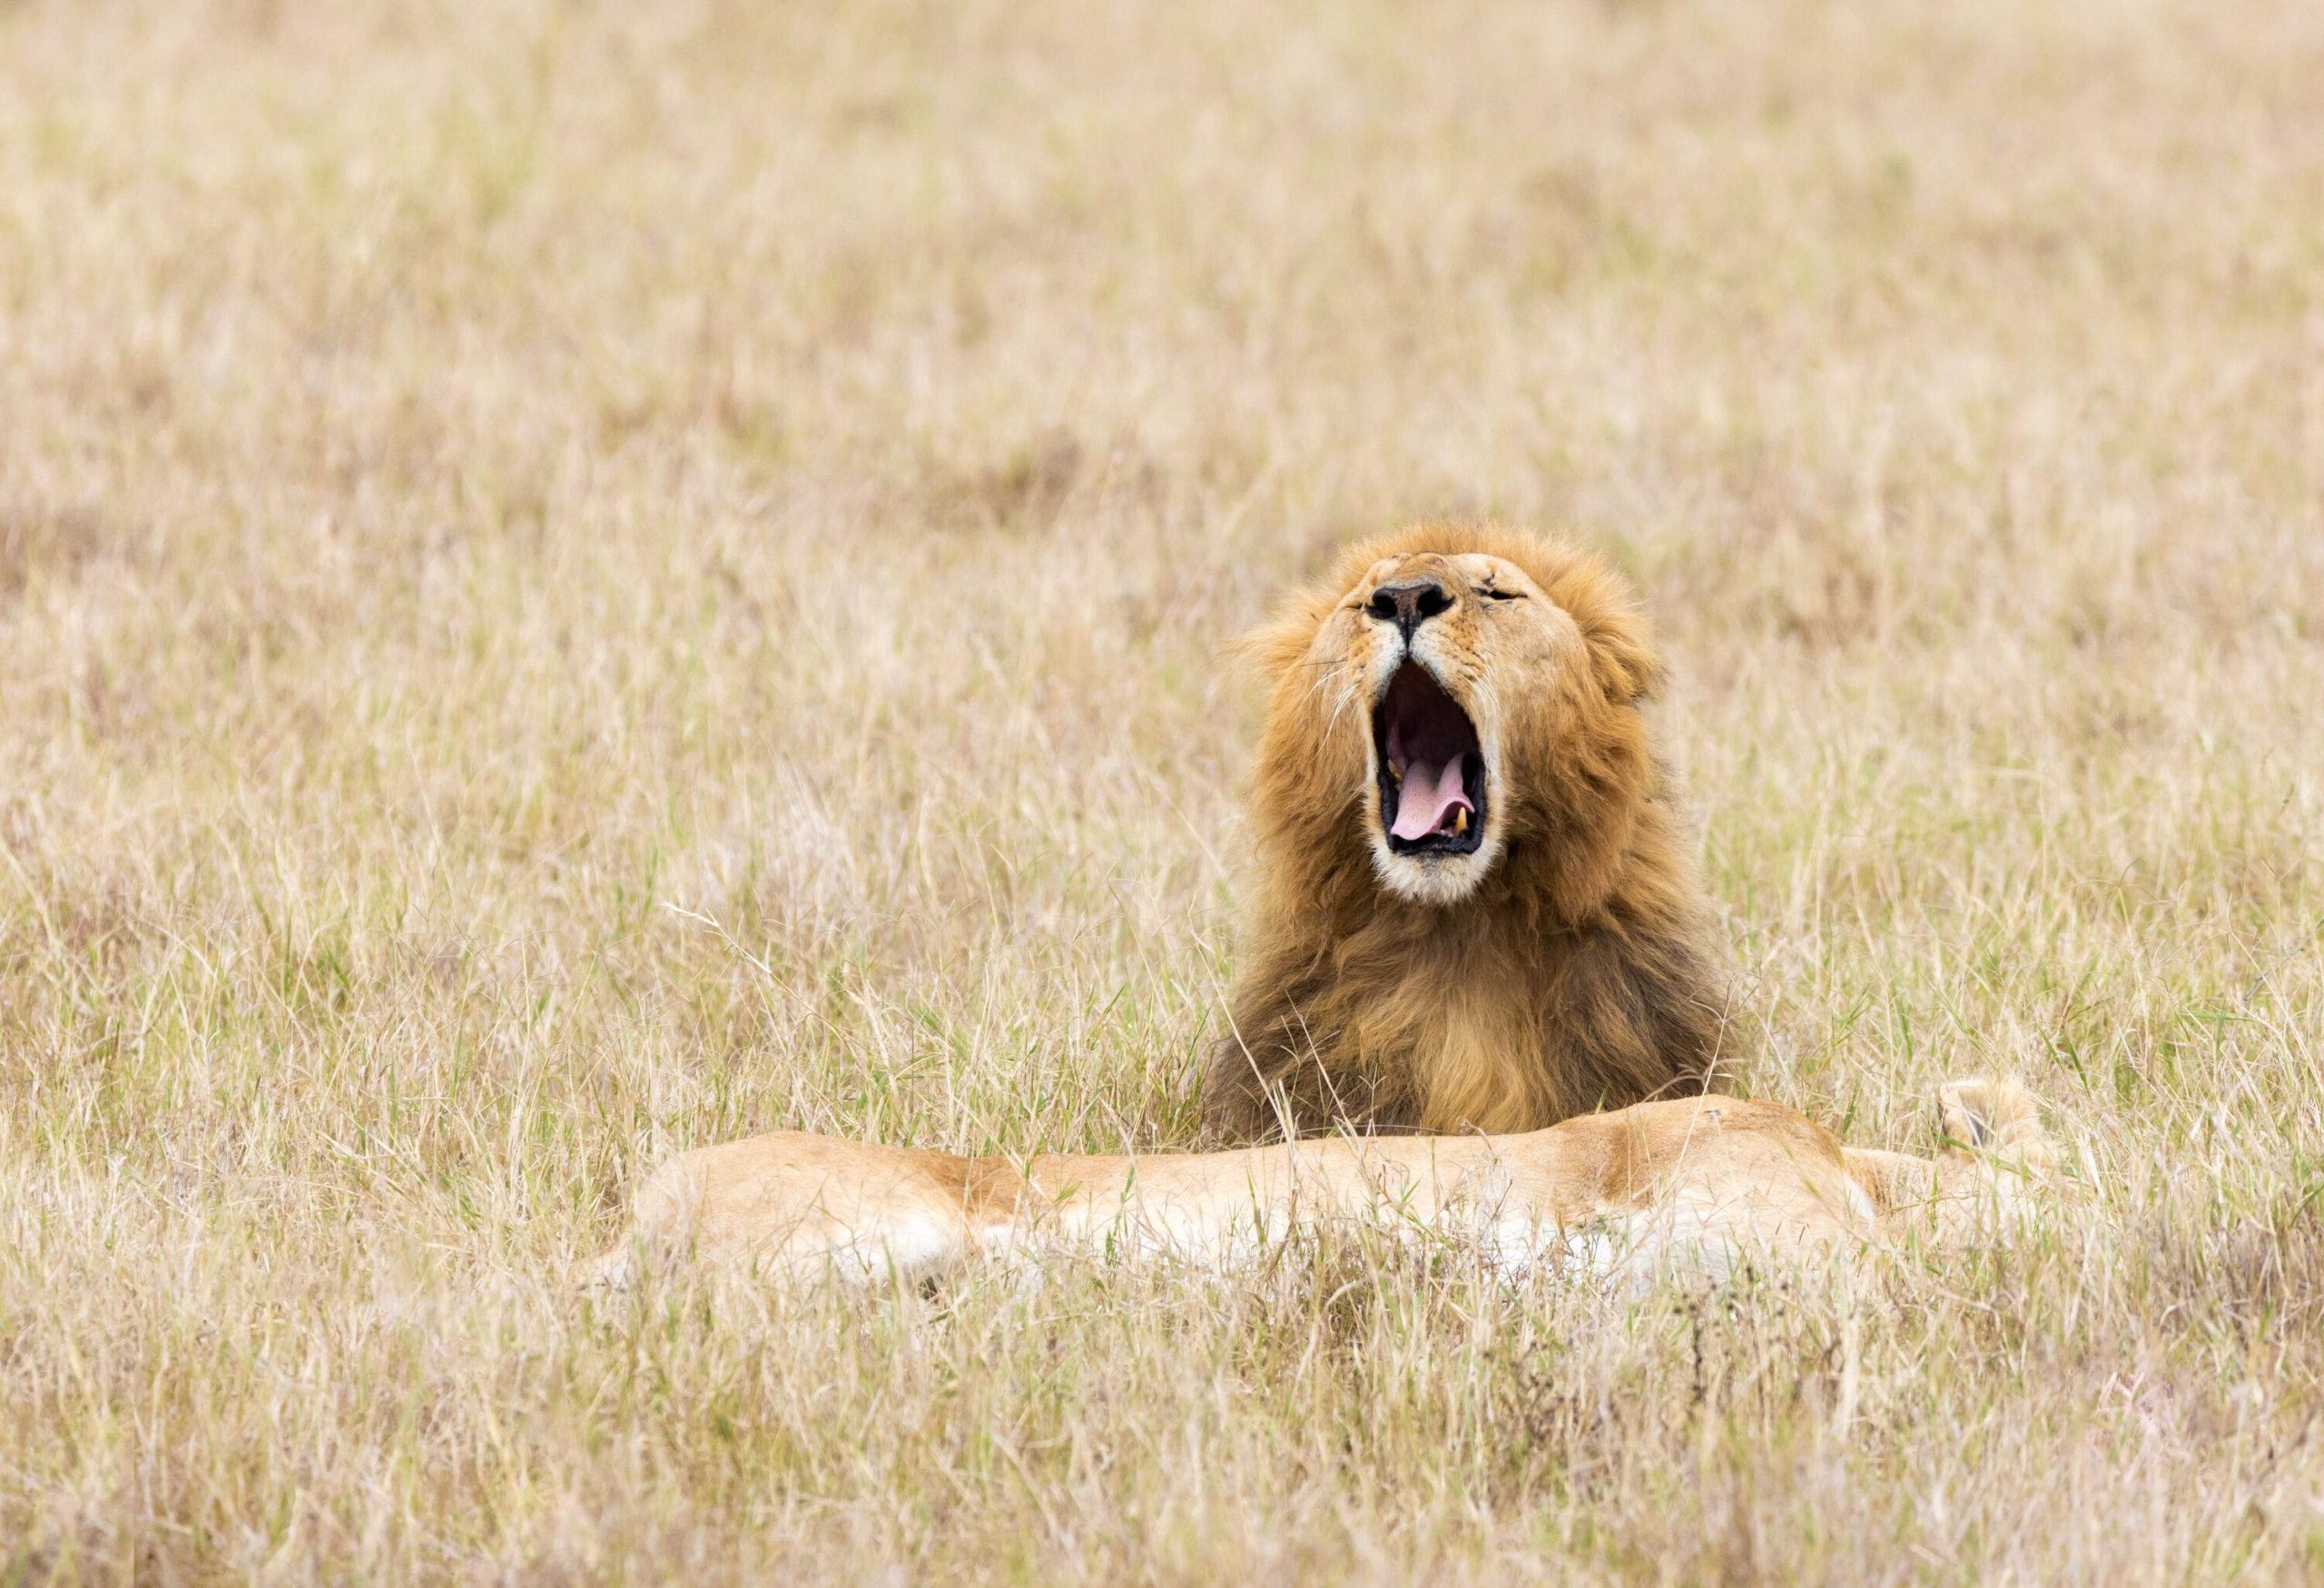 A young male lion yawns beside a sleeping lioness in dry grassland.